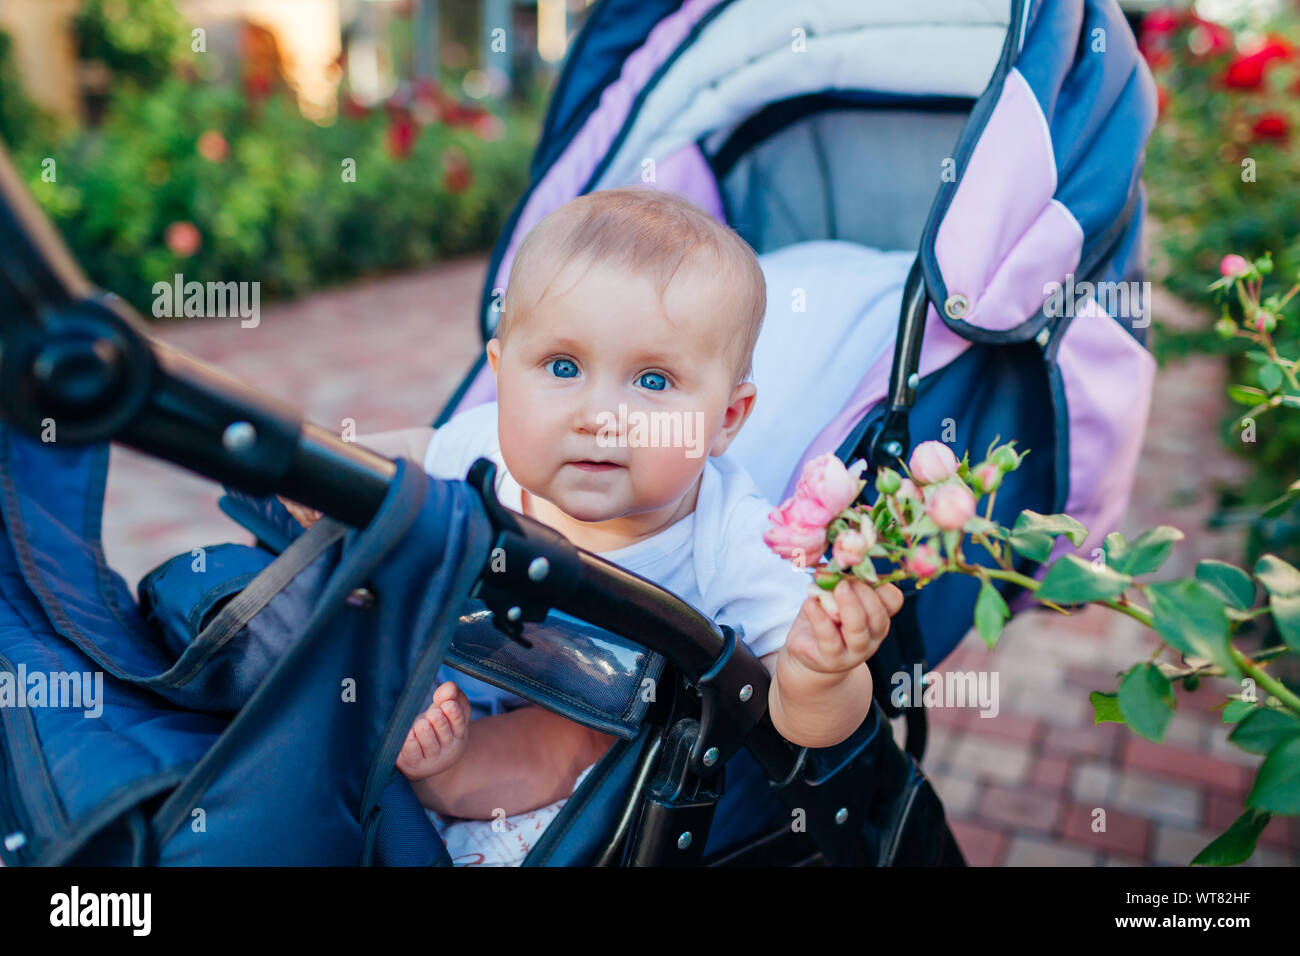 Baby girl sitting in carriage and touching roses in garden. Happy infant exploring world of nature outdoors. Curious kid Stock Photo